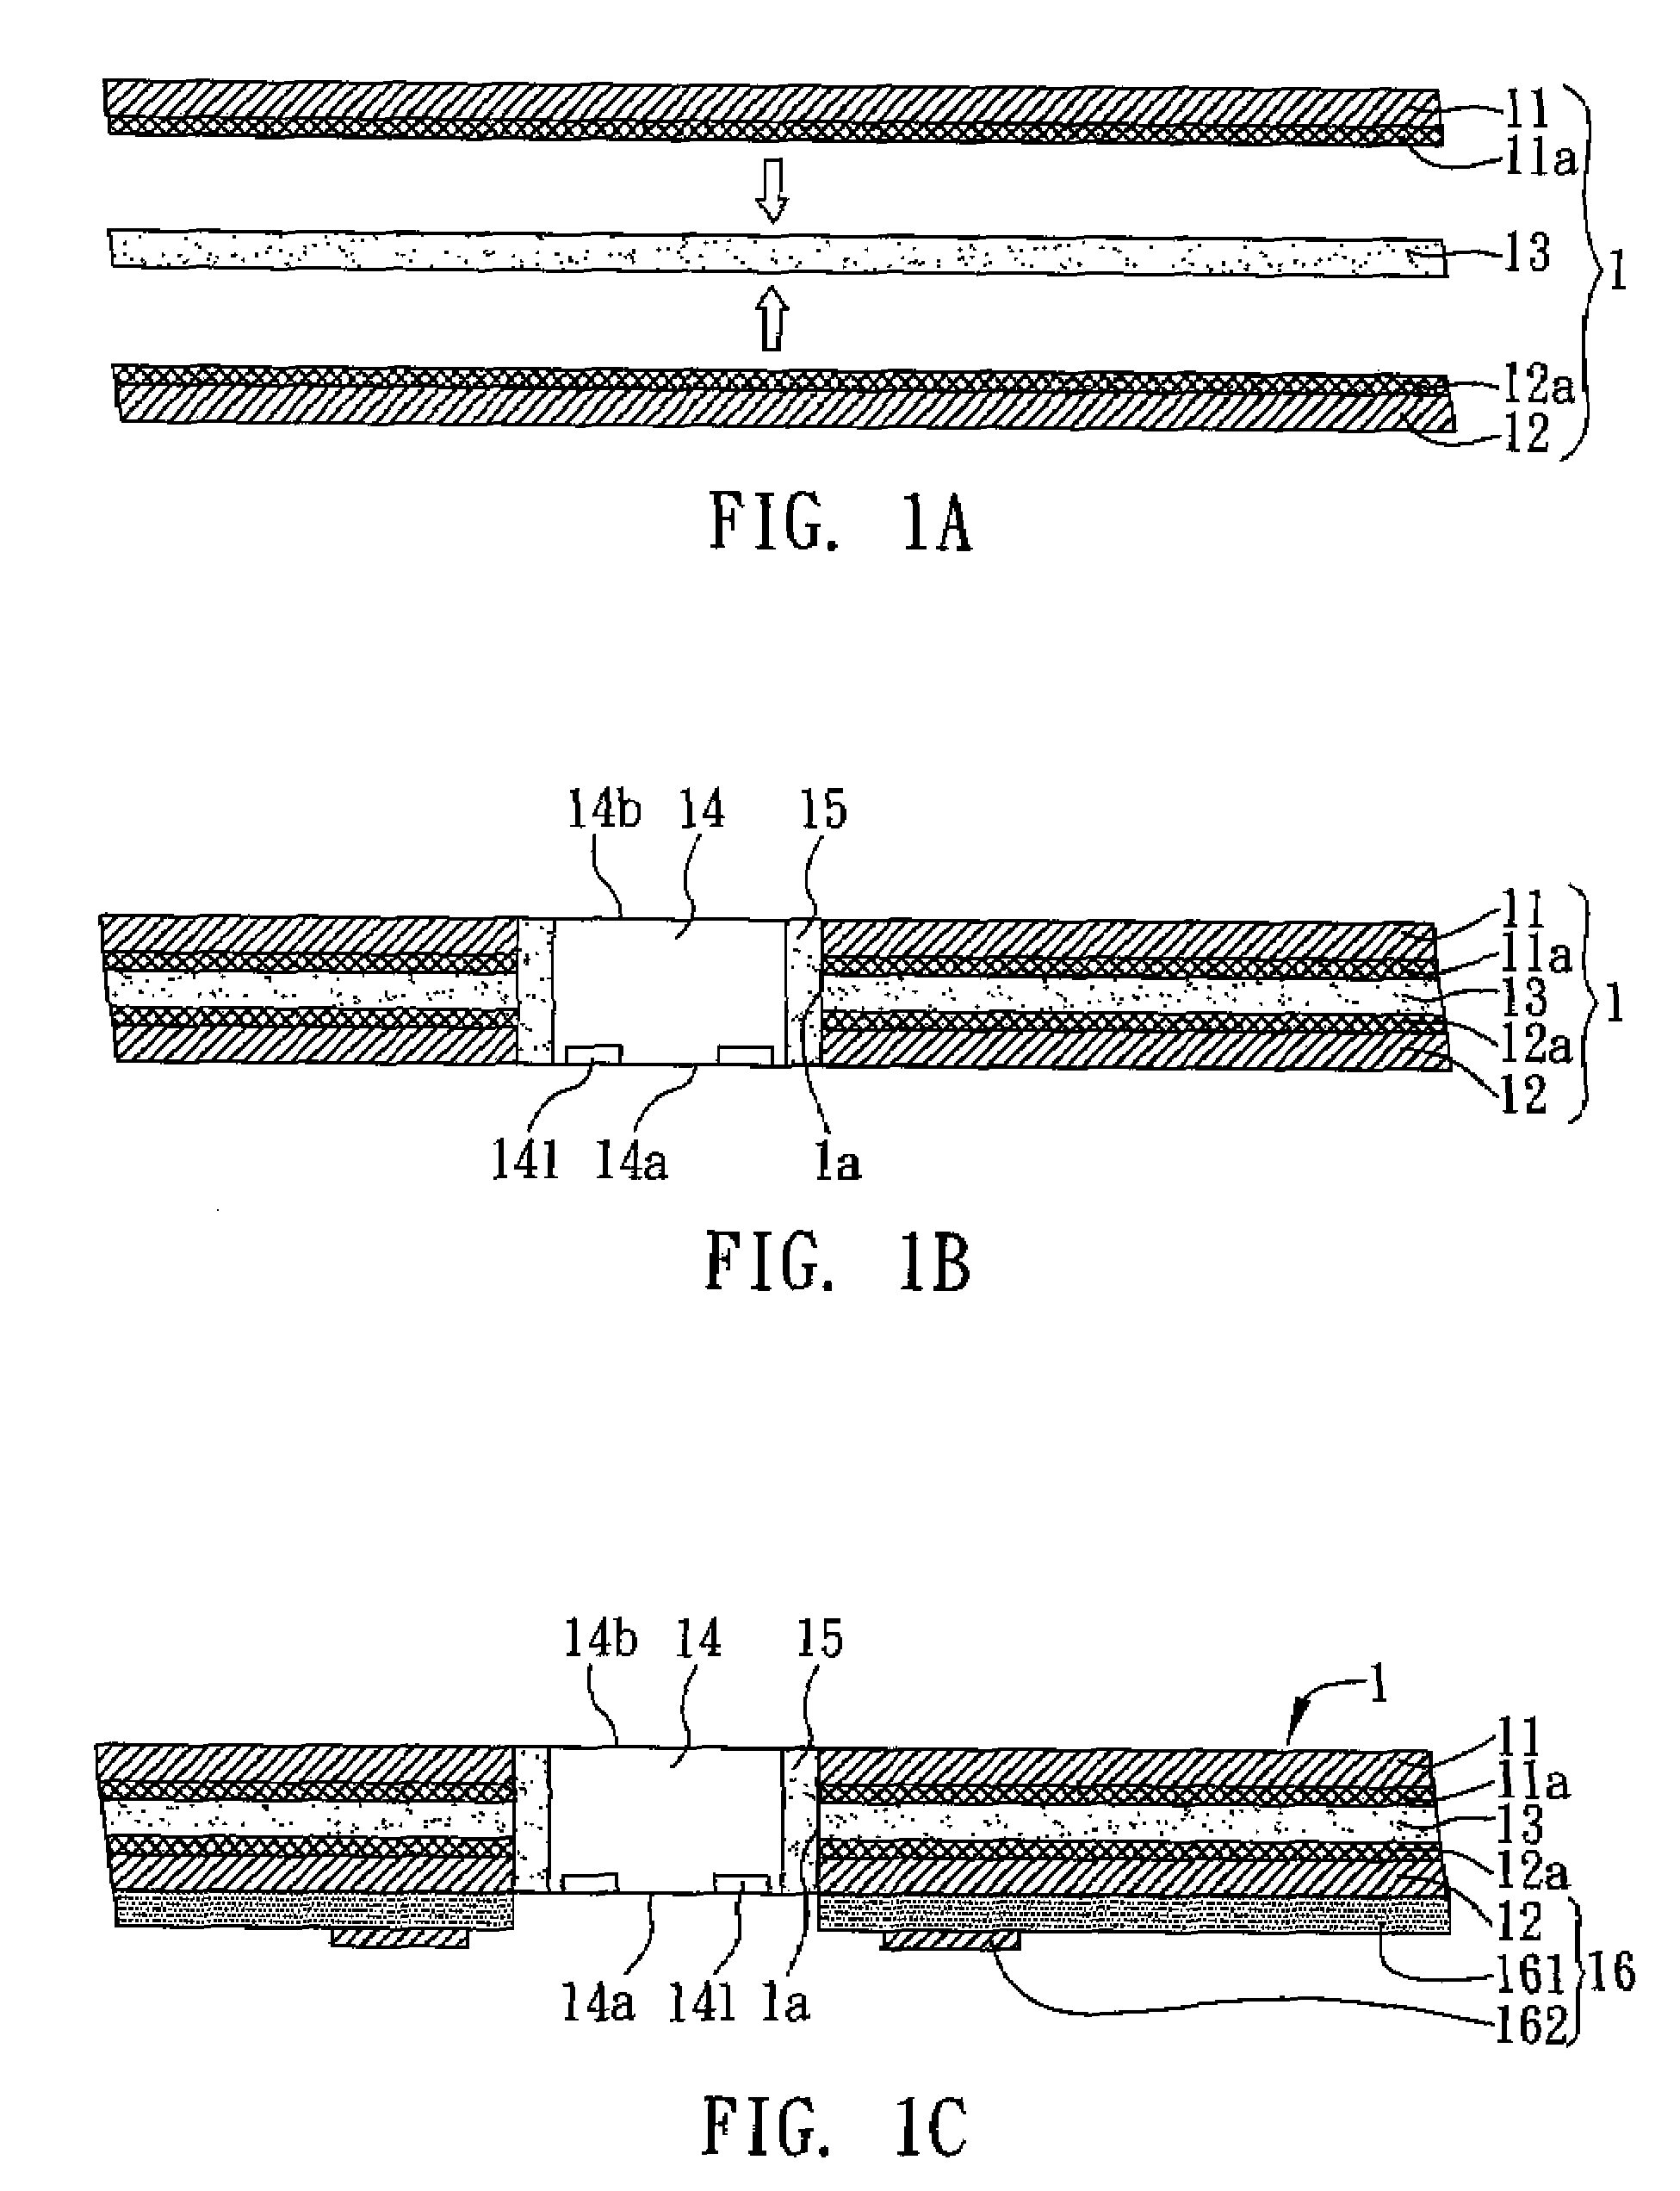 Circuit board structure with embedded electronic components